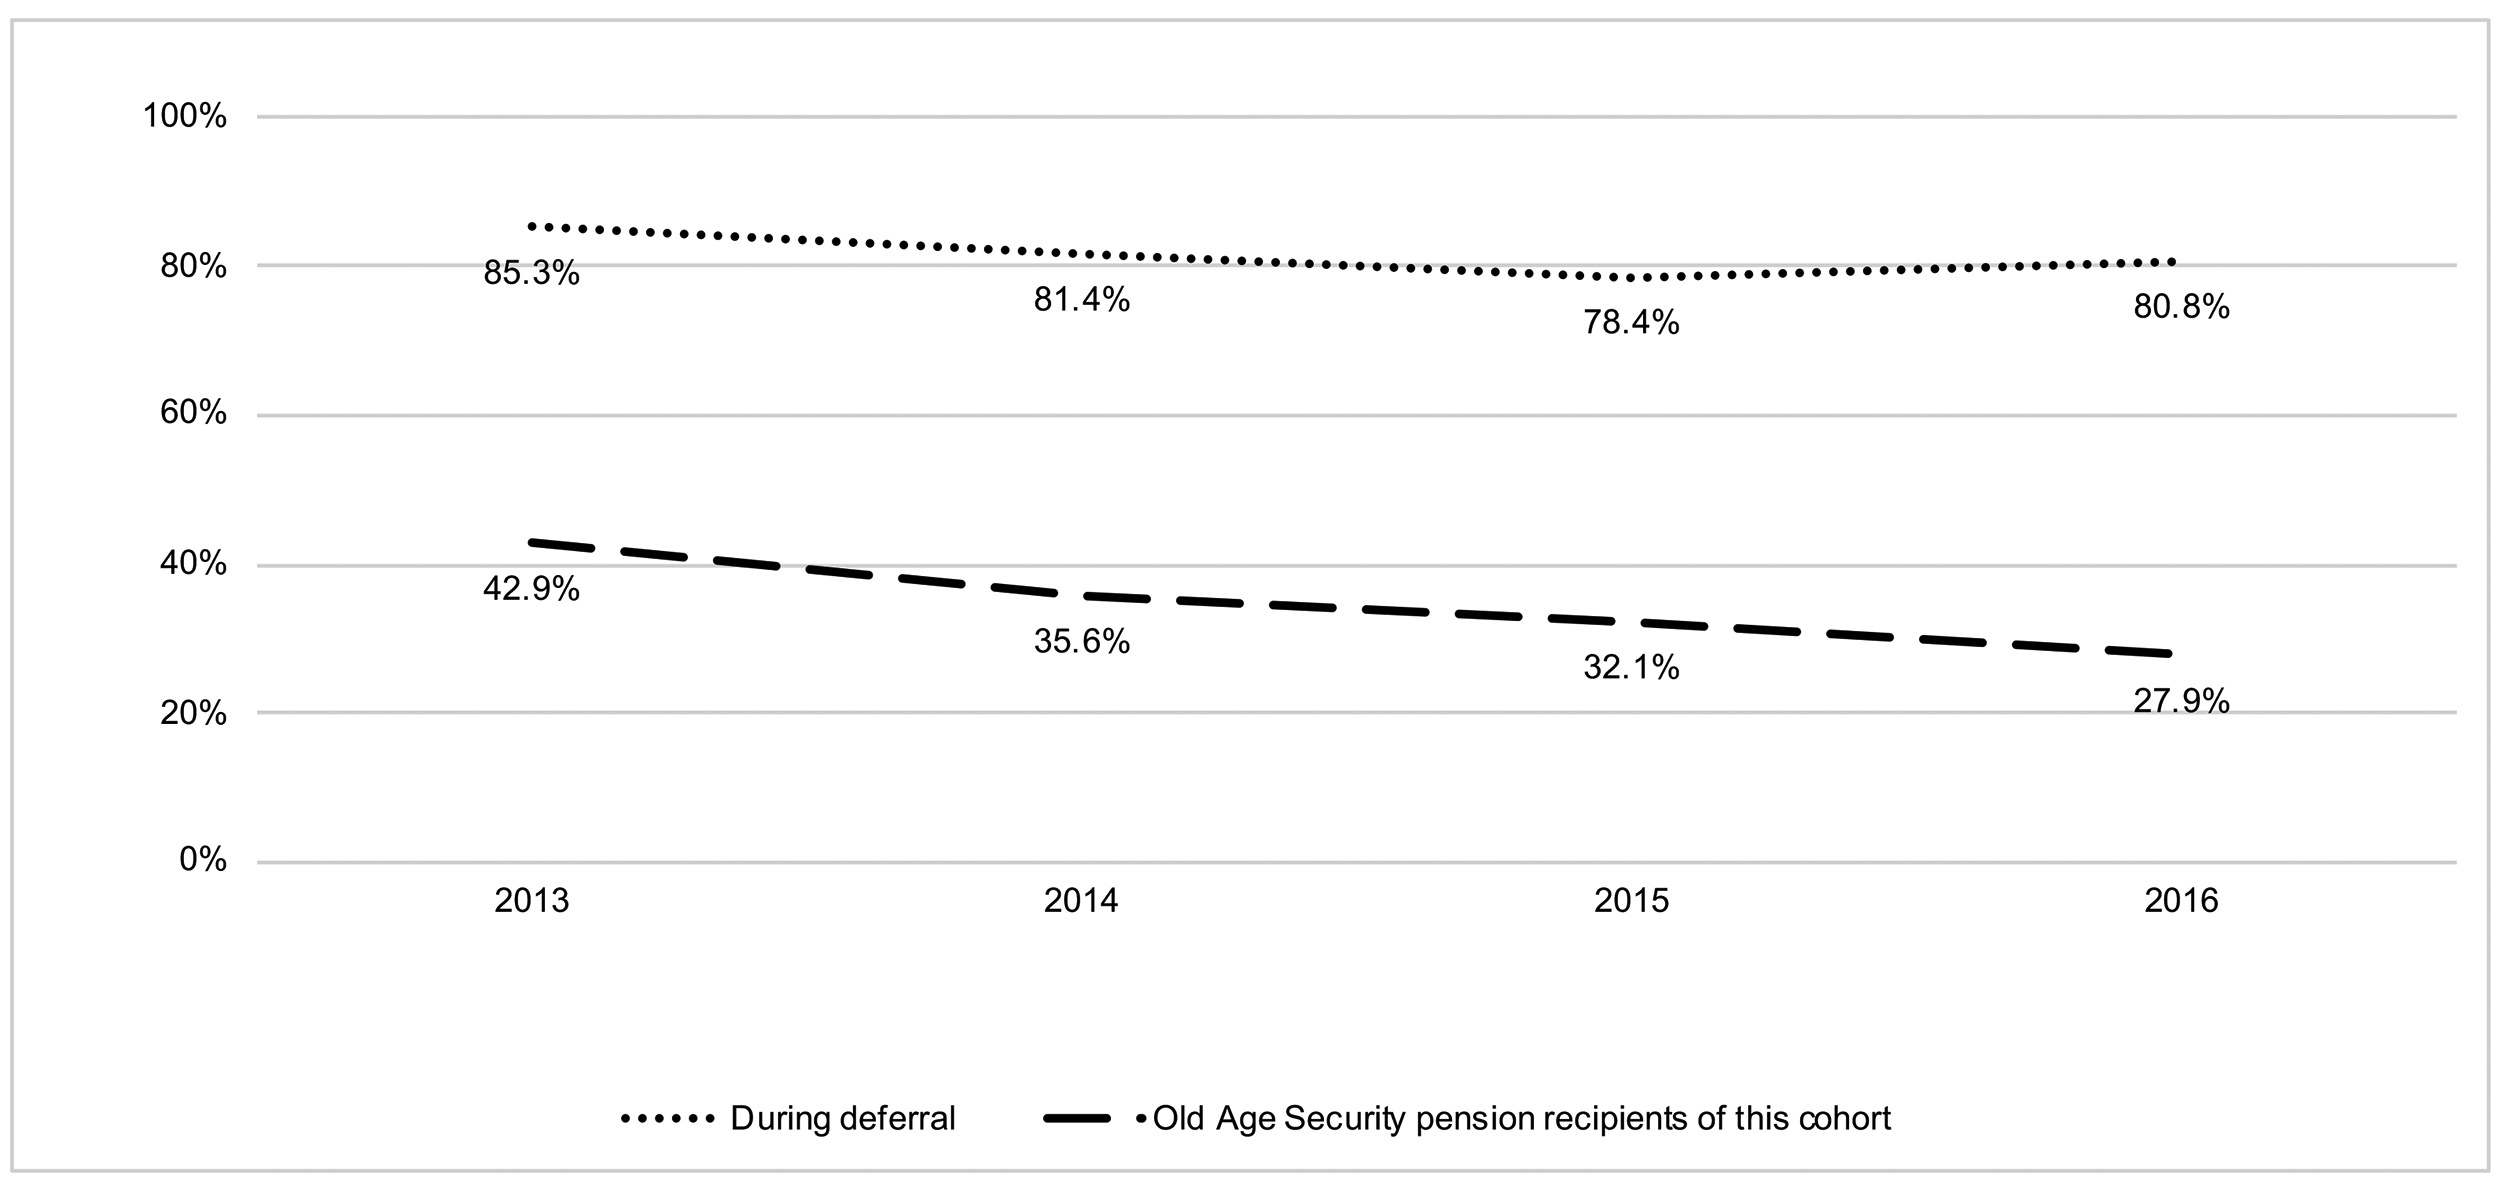 A line chart presents the proportion of seniors who were employed while deferring their OAS pension alongside the percentage of OAS pension recipients of the same cohort.: description follows